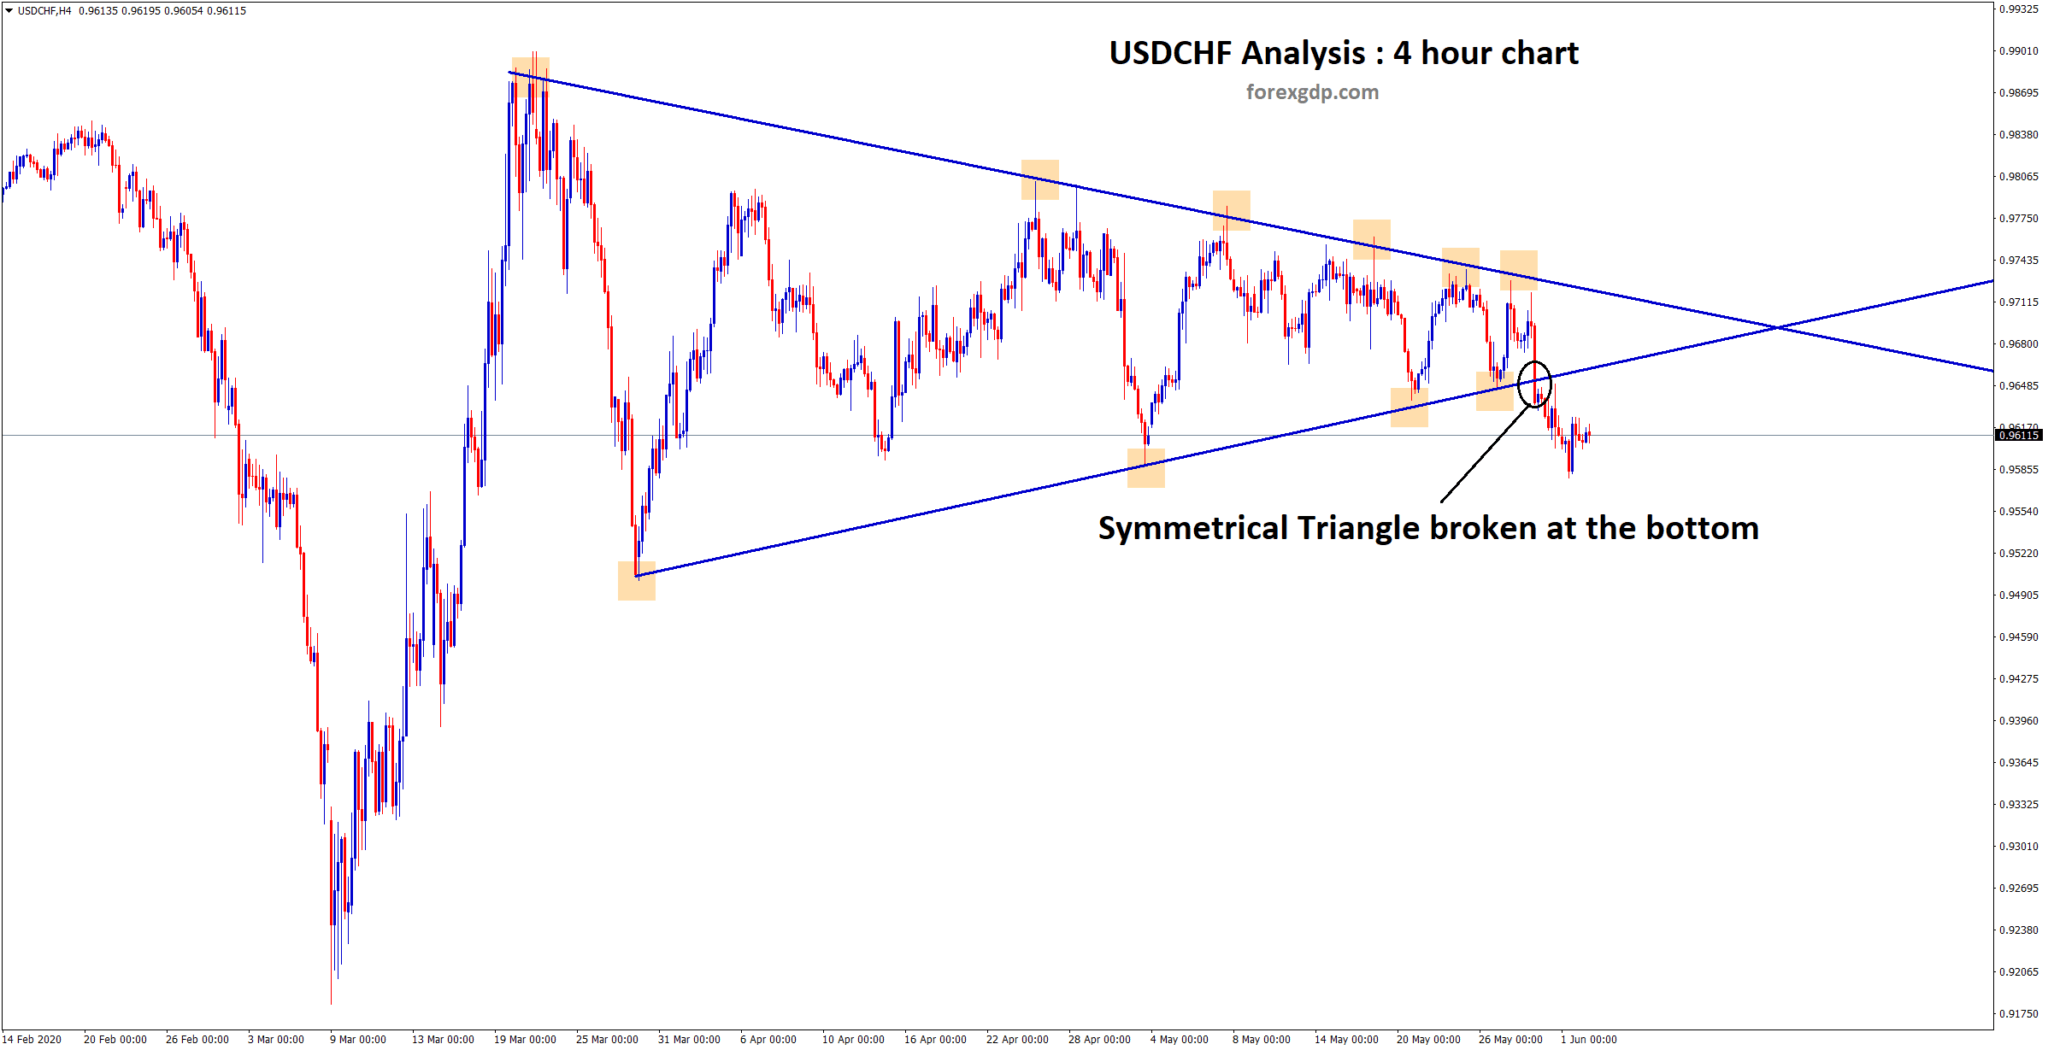 USDCHF Symmetrical triangle broken at the bottom level in 4 hour chart